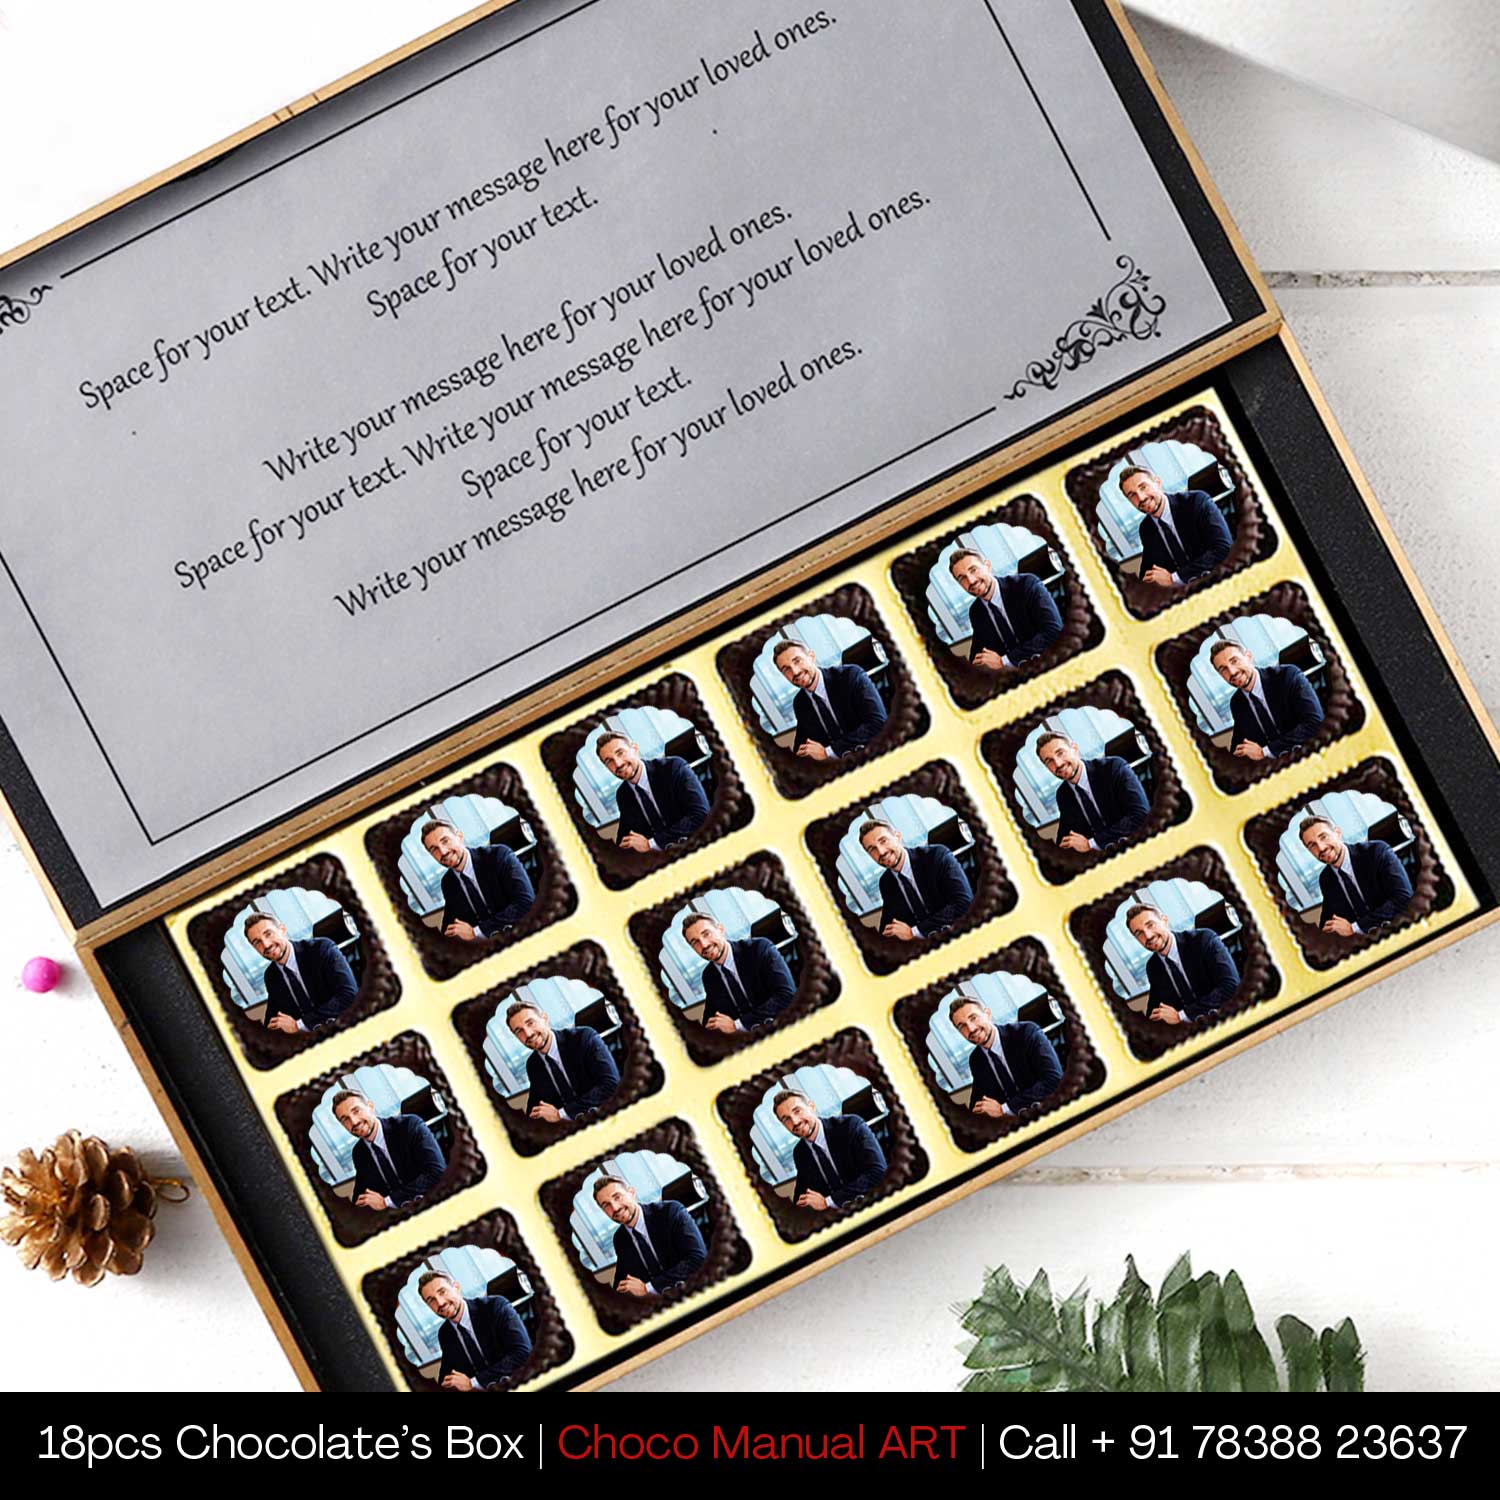  unique personalised gifts india customized gifts for best friend unique personalized gifts customized photo gifts customized gifts for girls customized gifts for couples best website for personalized gifts customized gifts amazon